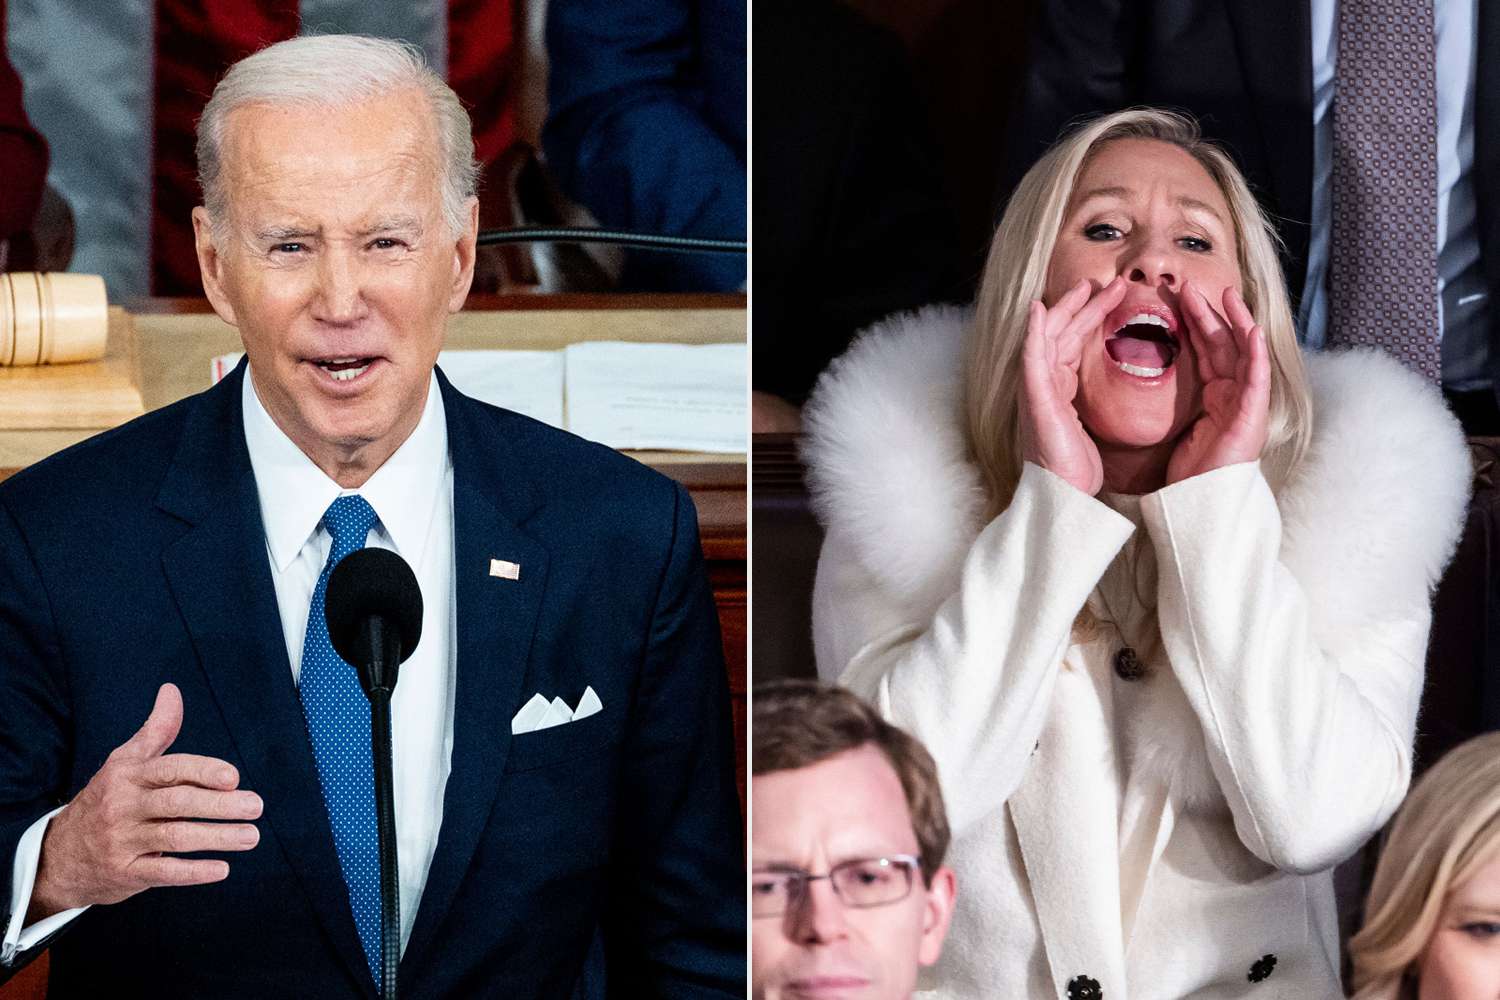 Did President Biden Outwit the Heckler? Insights, Reactions, and the Key Moments Unveiled